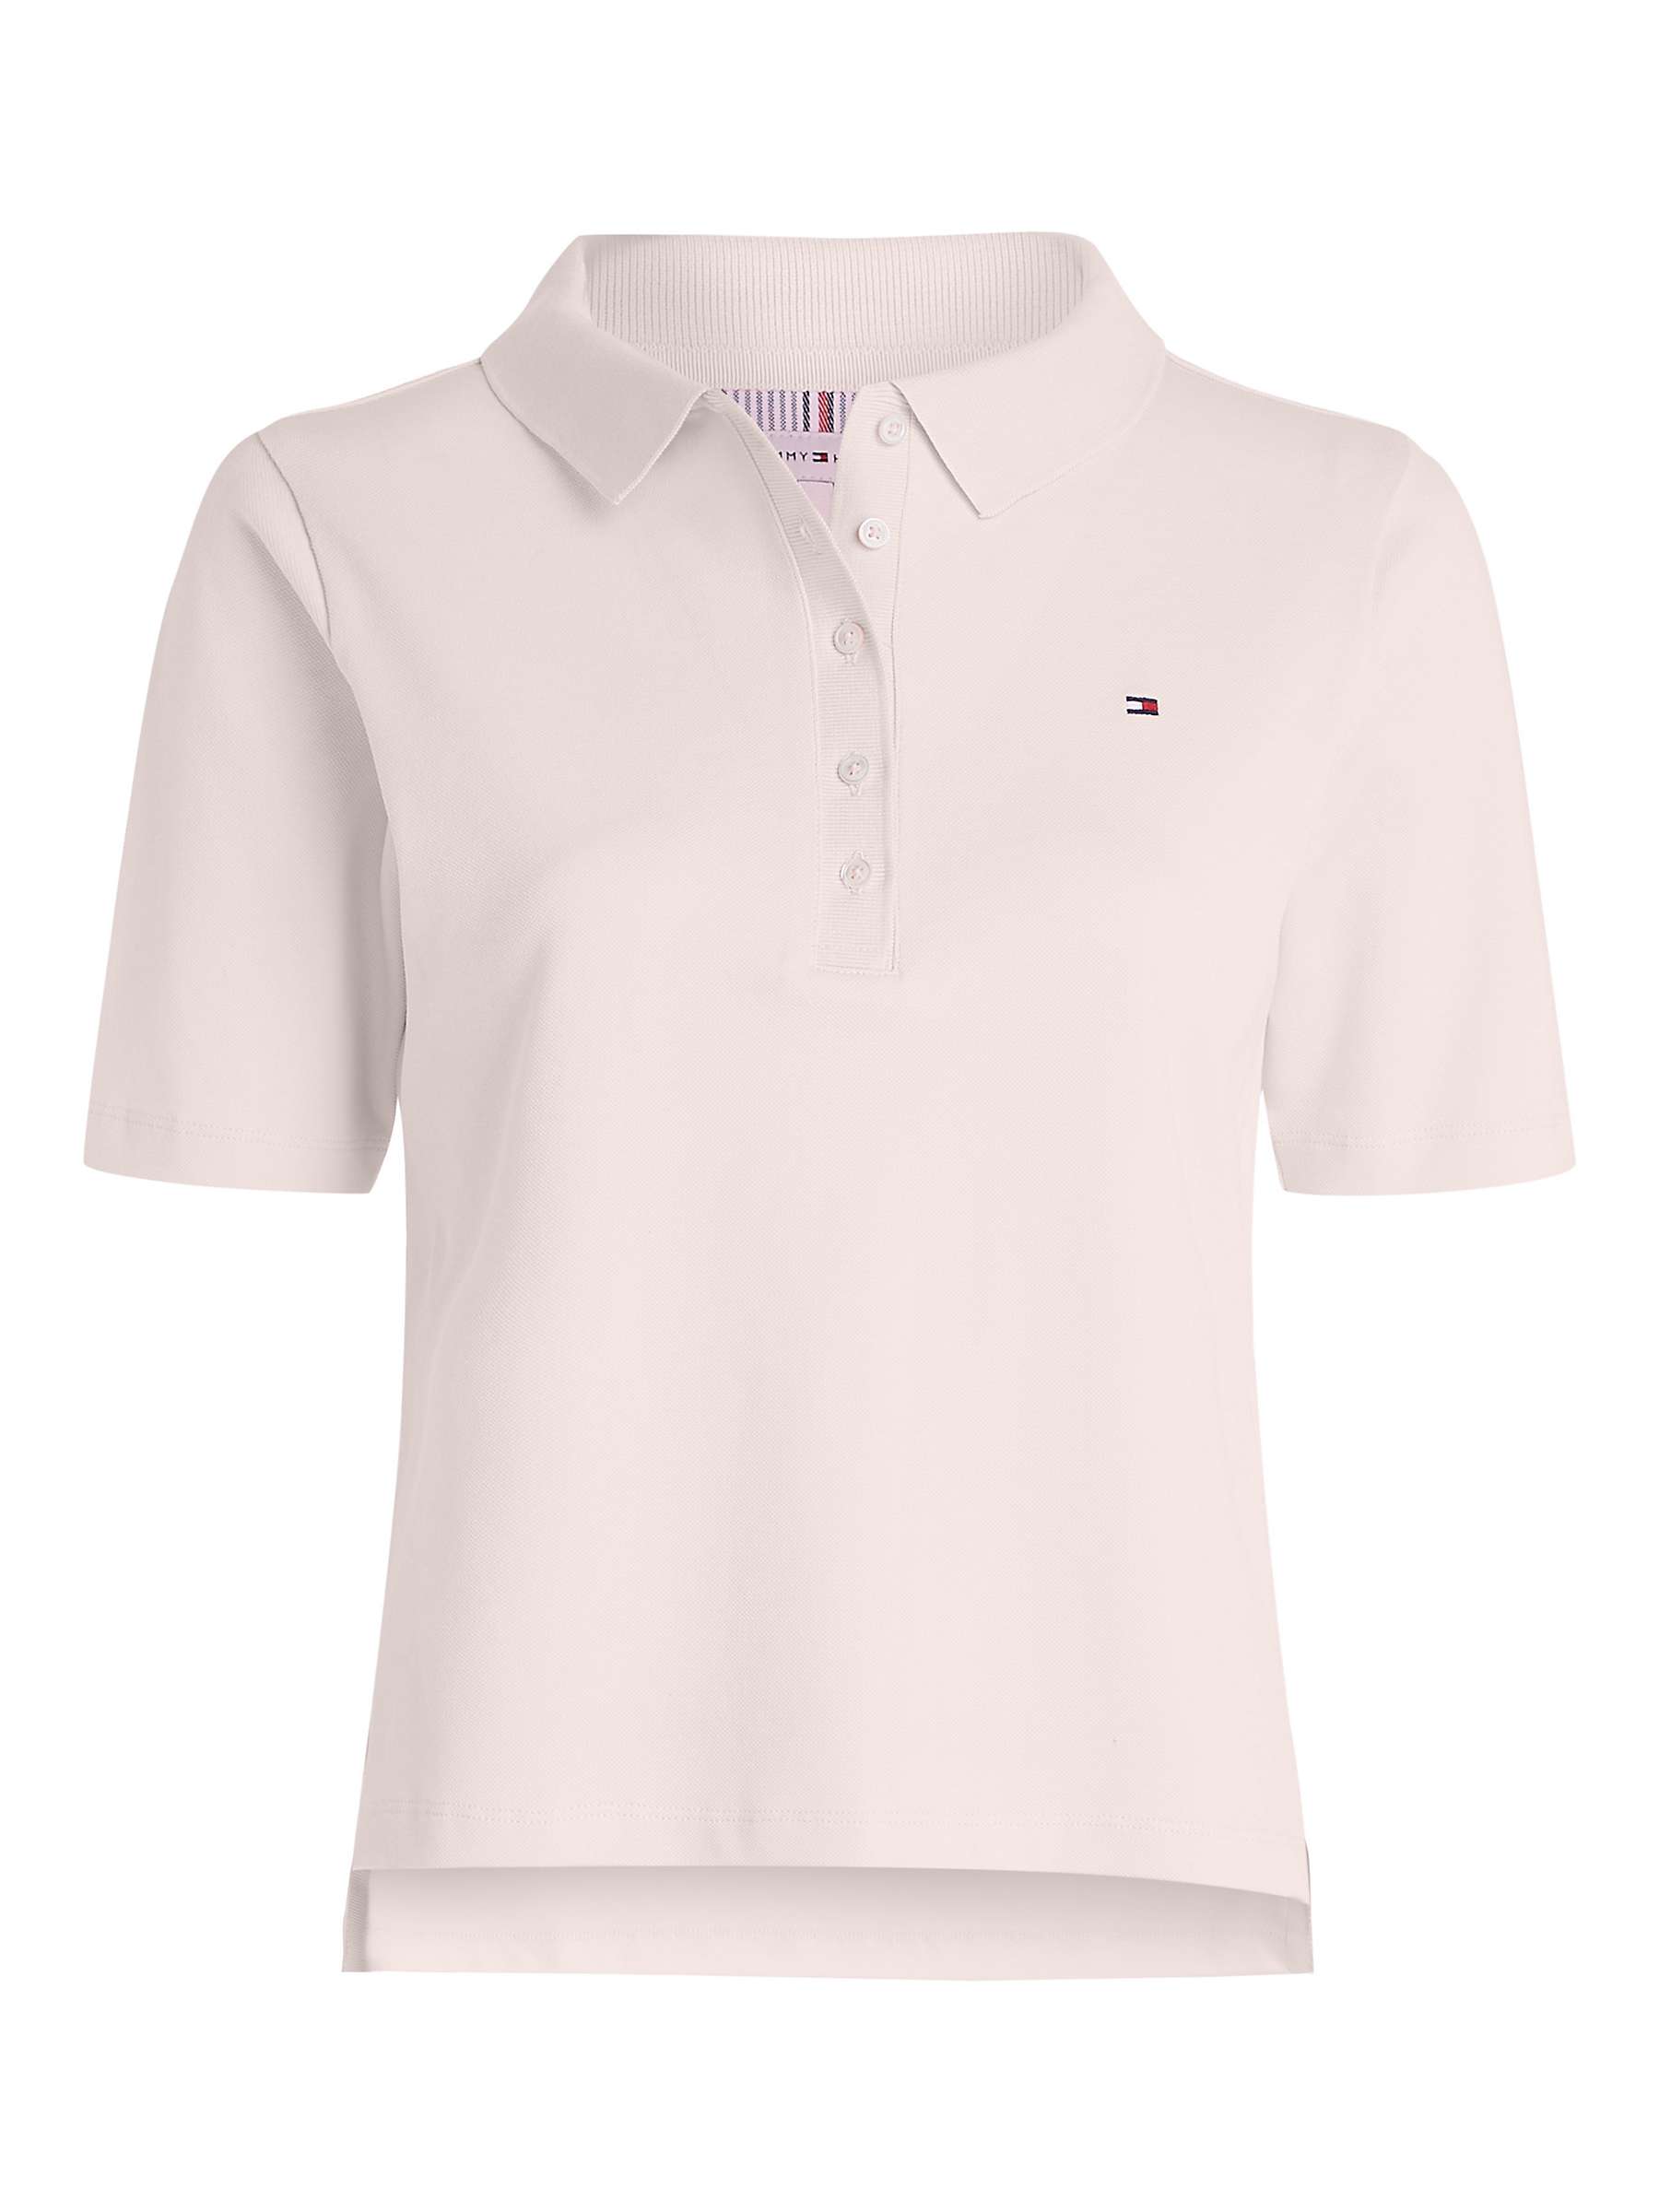 Buy Tommy Hilfiger Short Sleeve Polo T-Shirt, Whimsy Pink Online at johnlewis.com